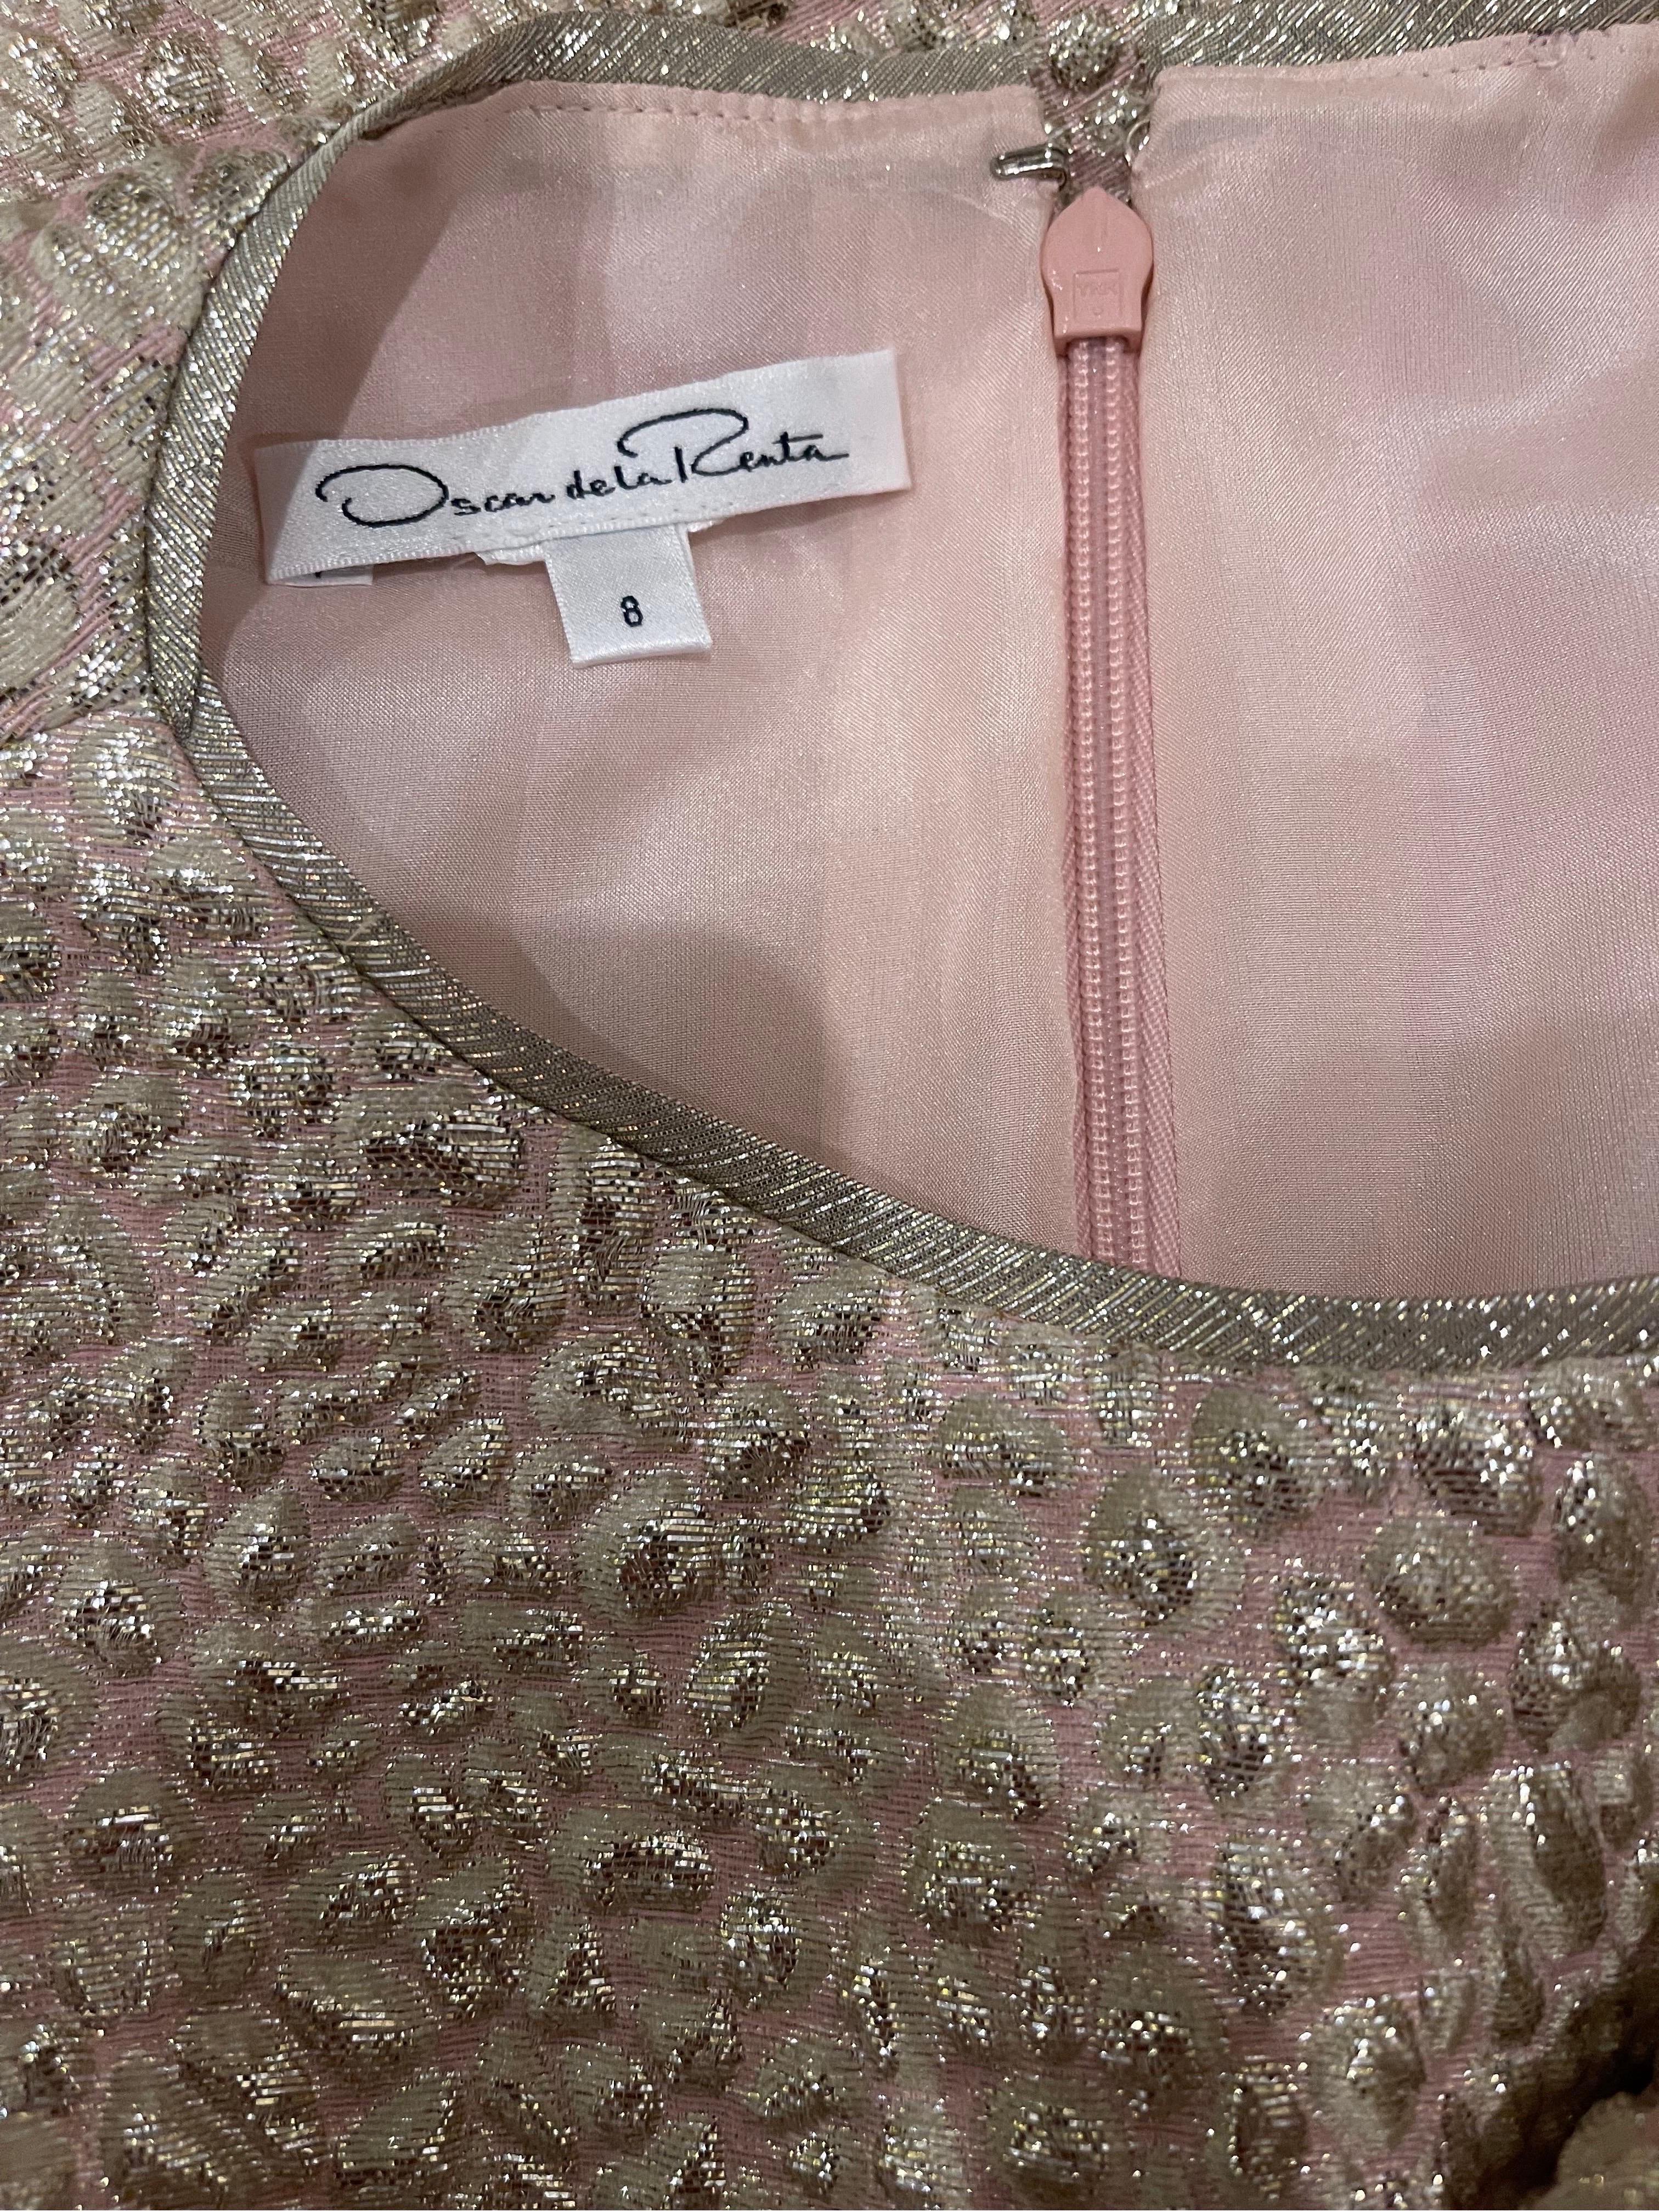 Beautiful early 2000s Y2K OSCAR DE LA RENTA pink, gold and silver metallic silk dress and shirt sleeve bolero jacket ! Dress features a tailored bodice with an A-Line skirt. Hidden zipper up the back with hook-and-eye closure. Bolero has